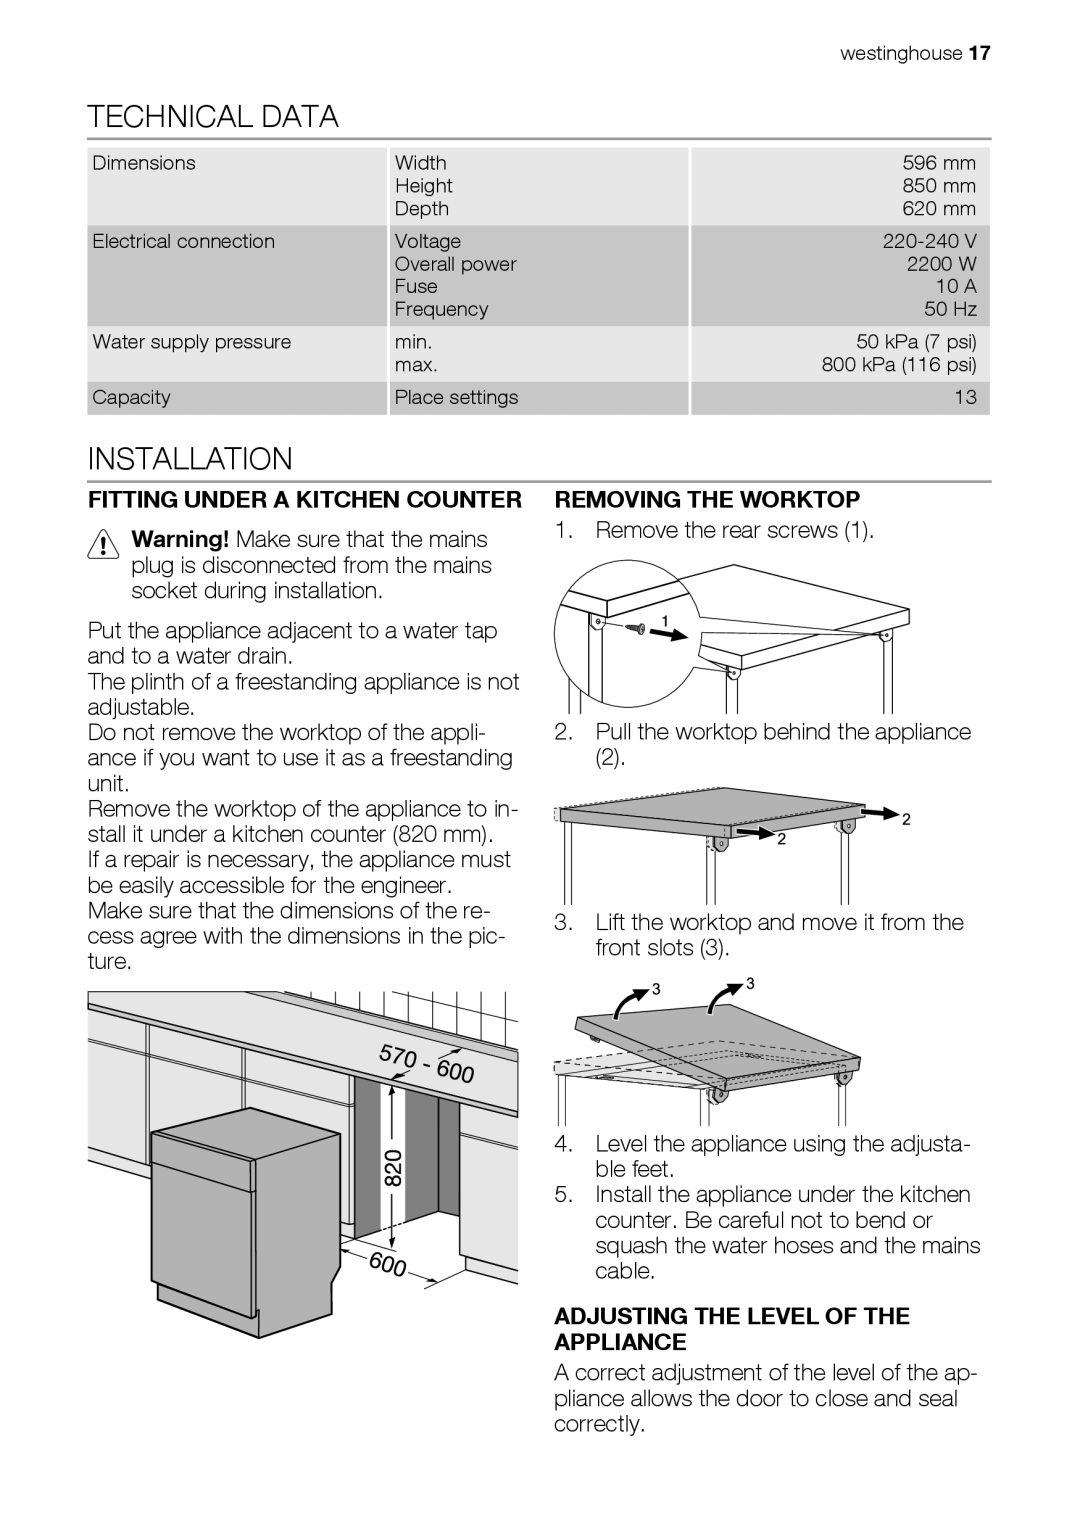 Westinghouse WSF6602 user manual Technical Data, Installation, Fitting Under A Kitchen Counter, Removing The Worktop 